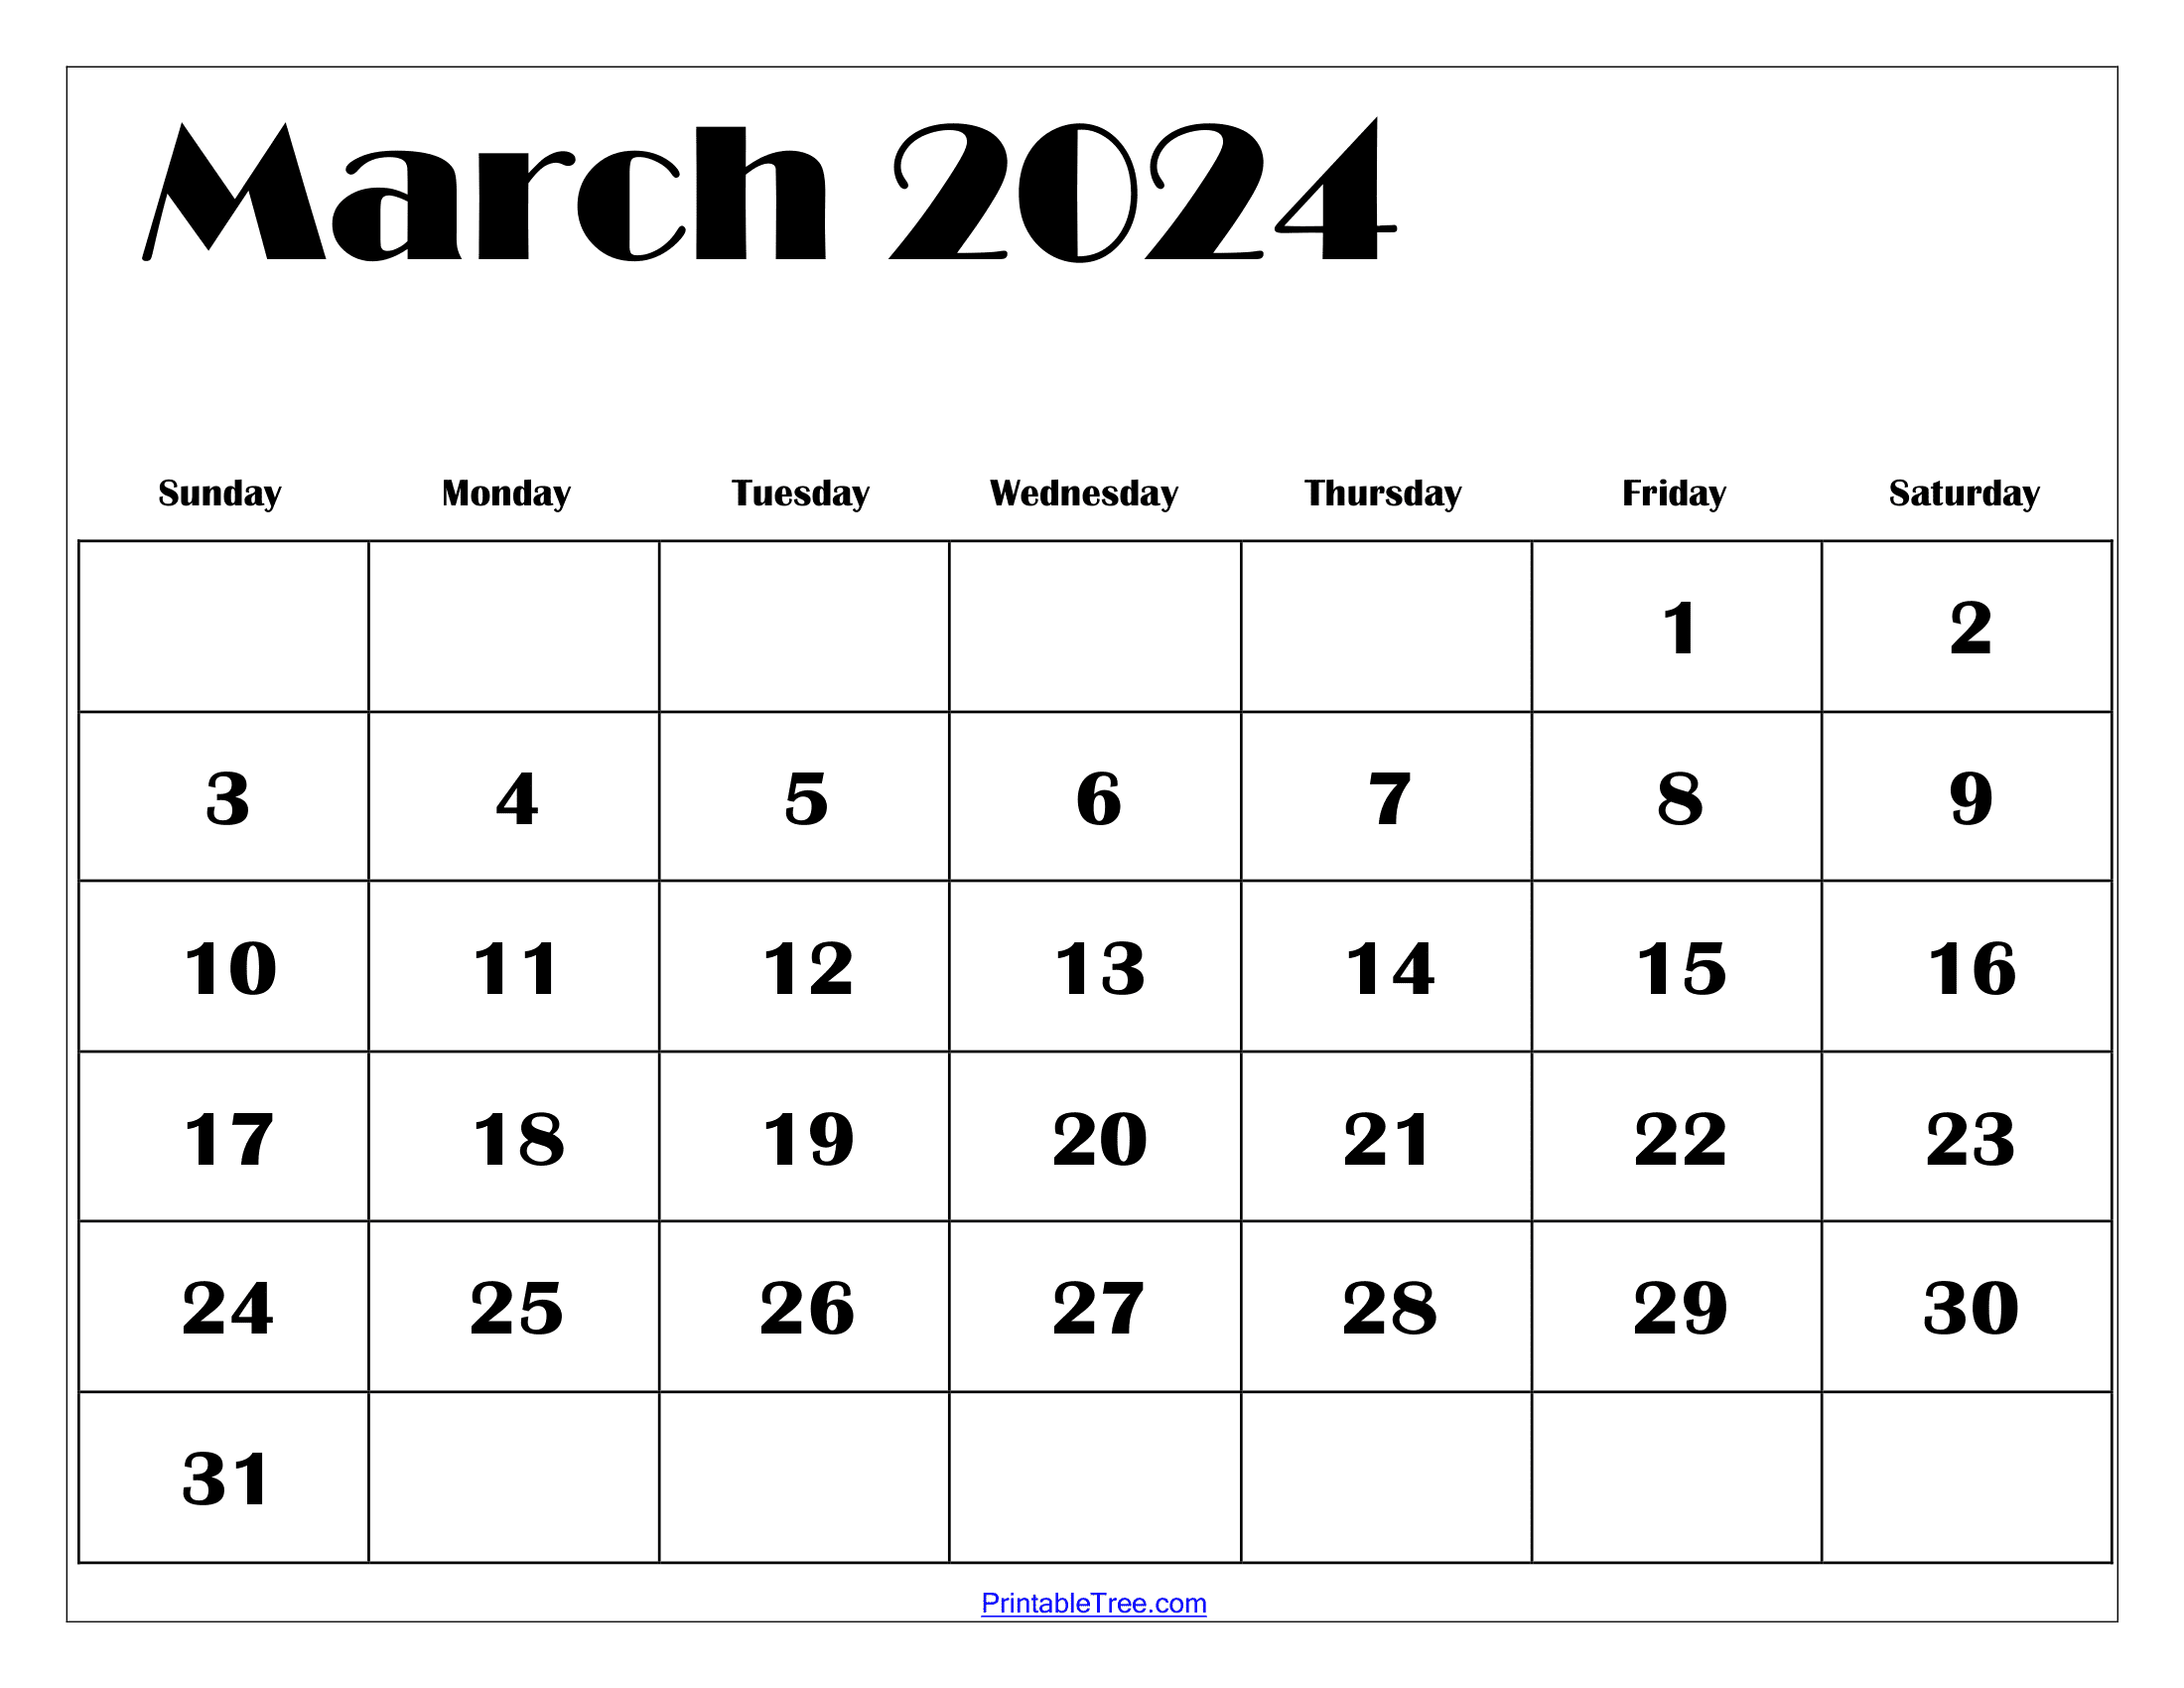 March 2024 Calendar Printable Pdf With Holidays Template Free for March 2024 Printable Calendar Free